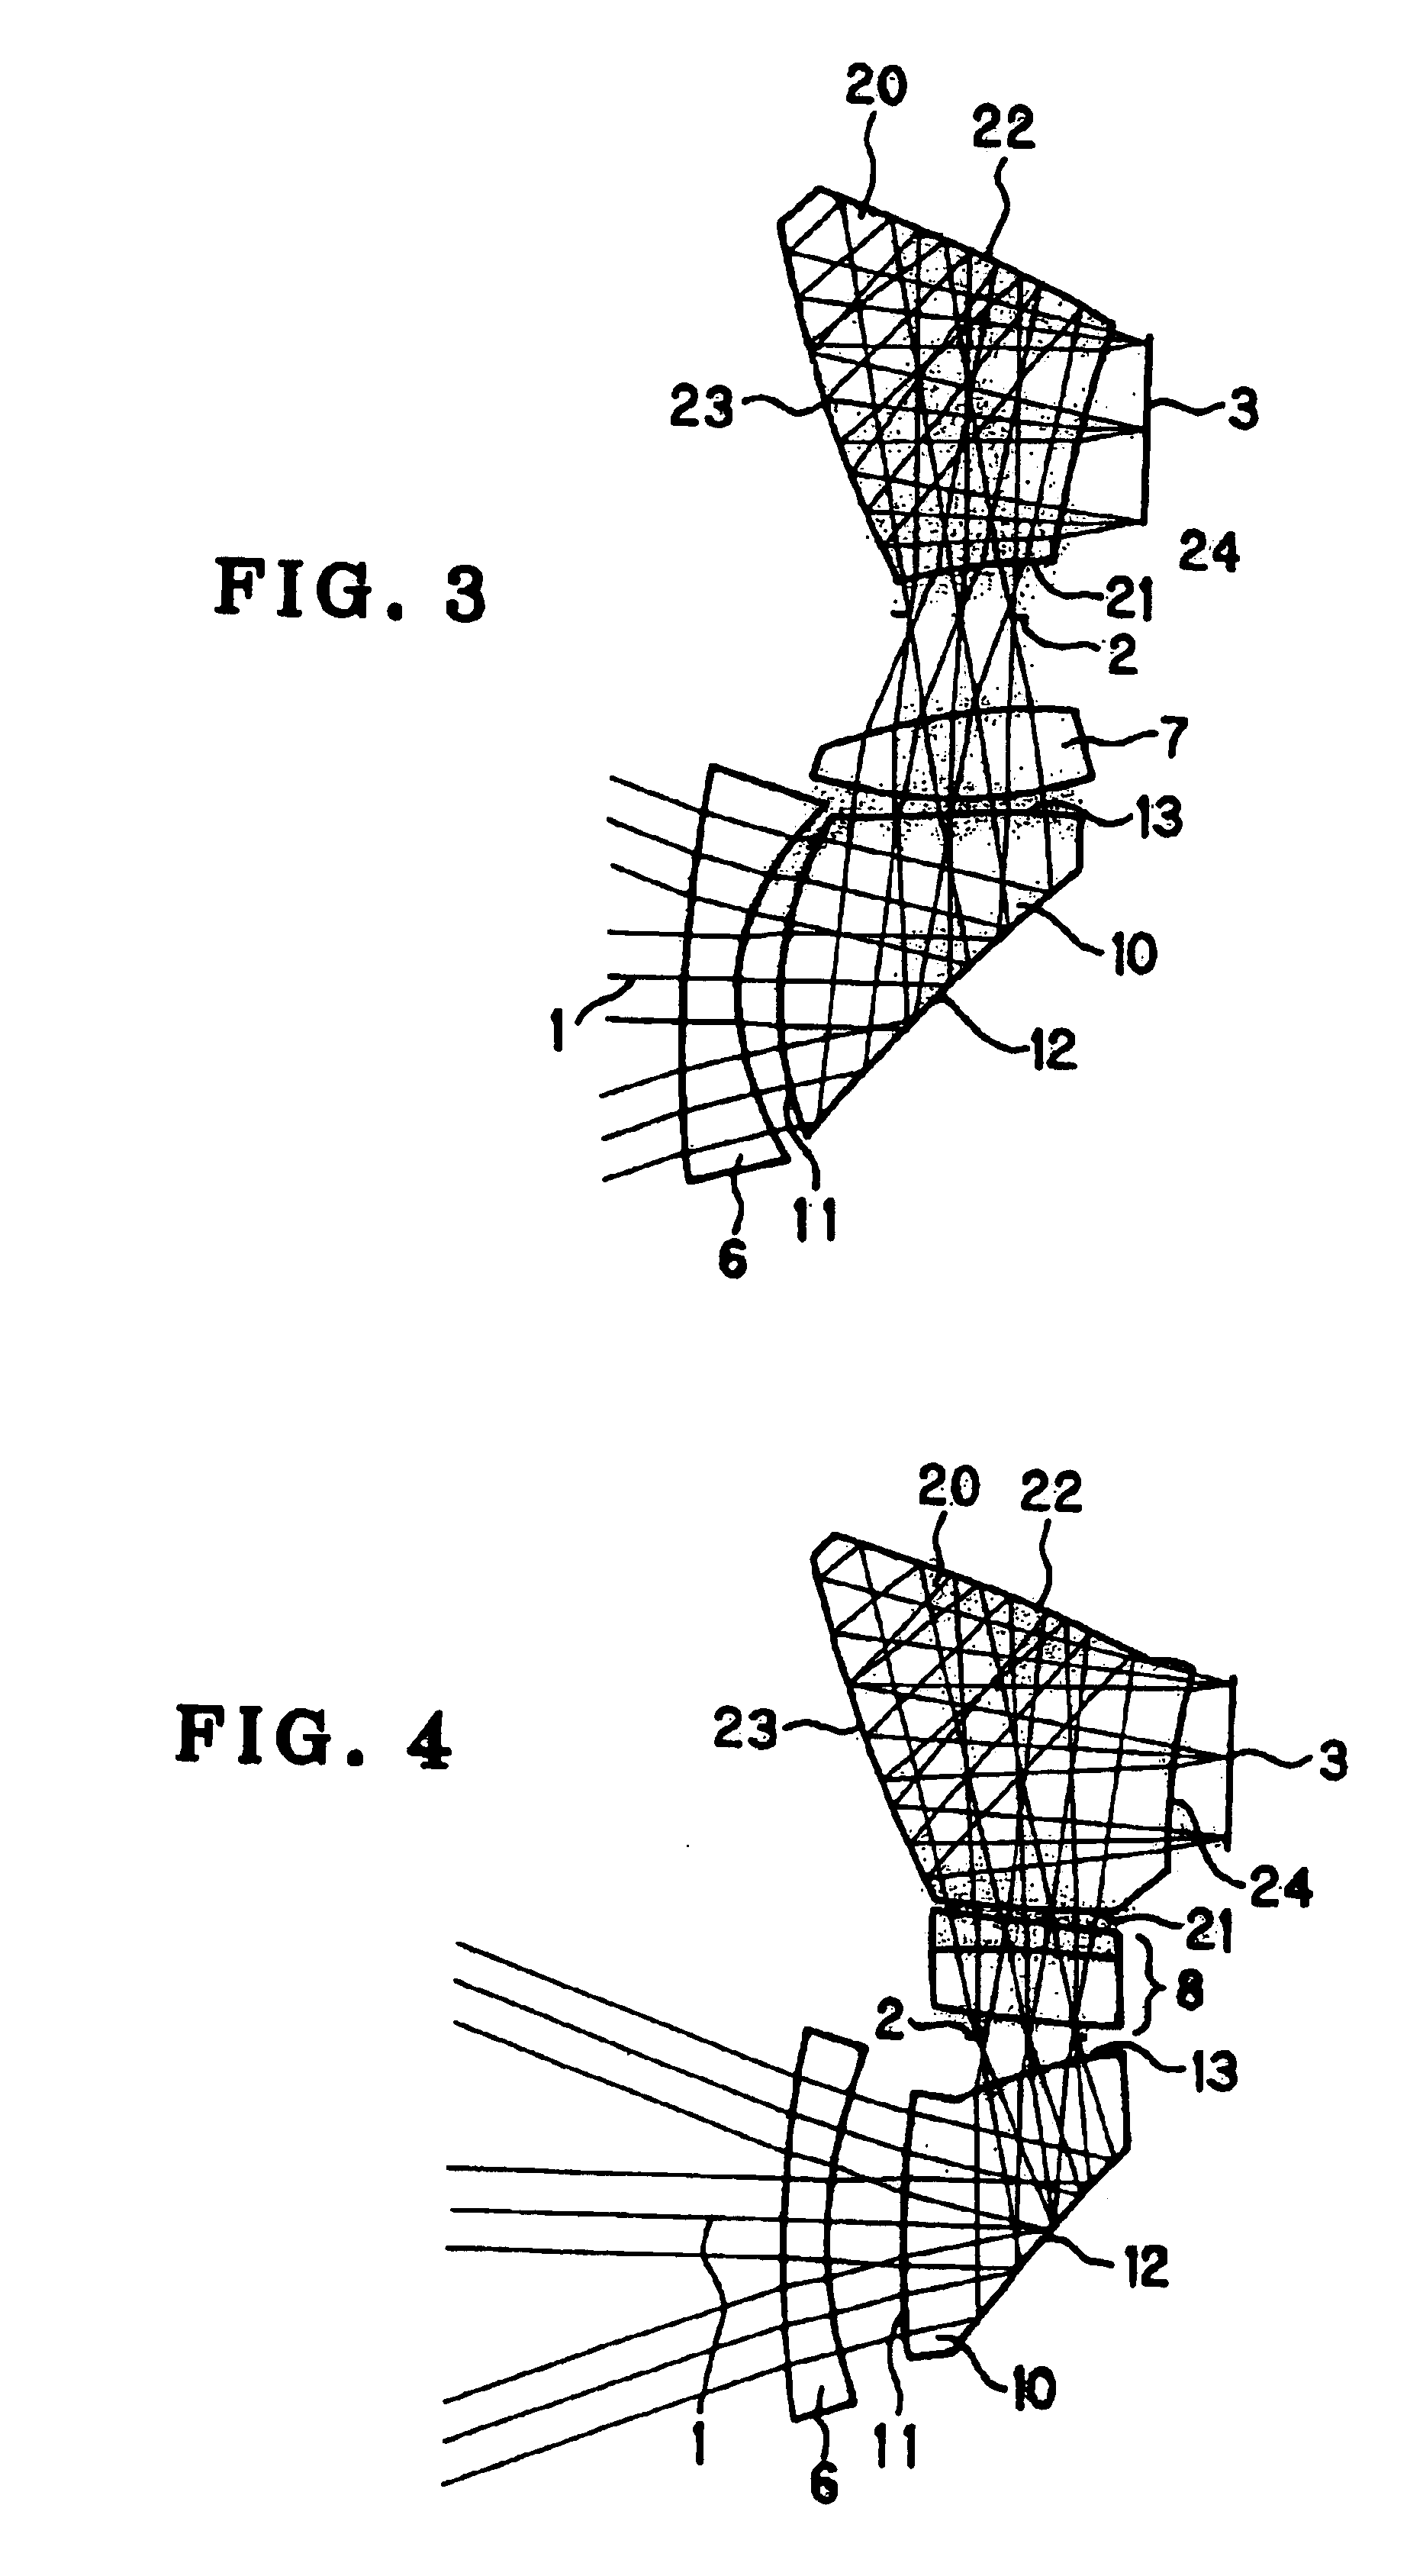 Image-forming optical system